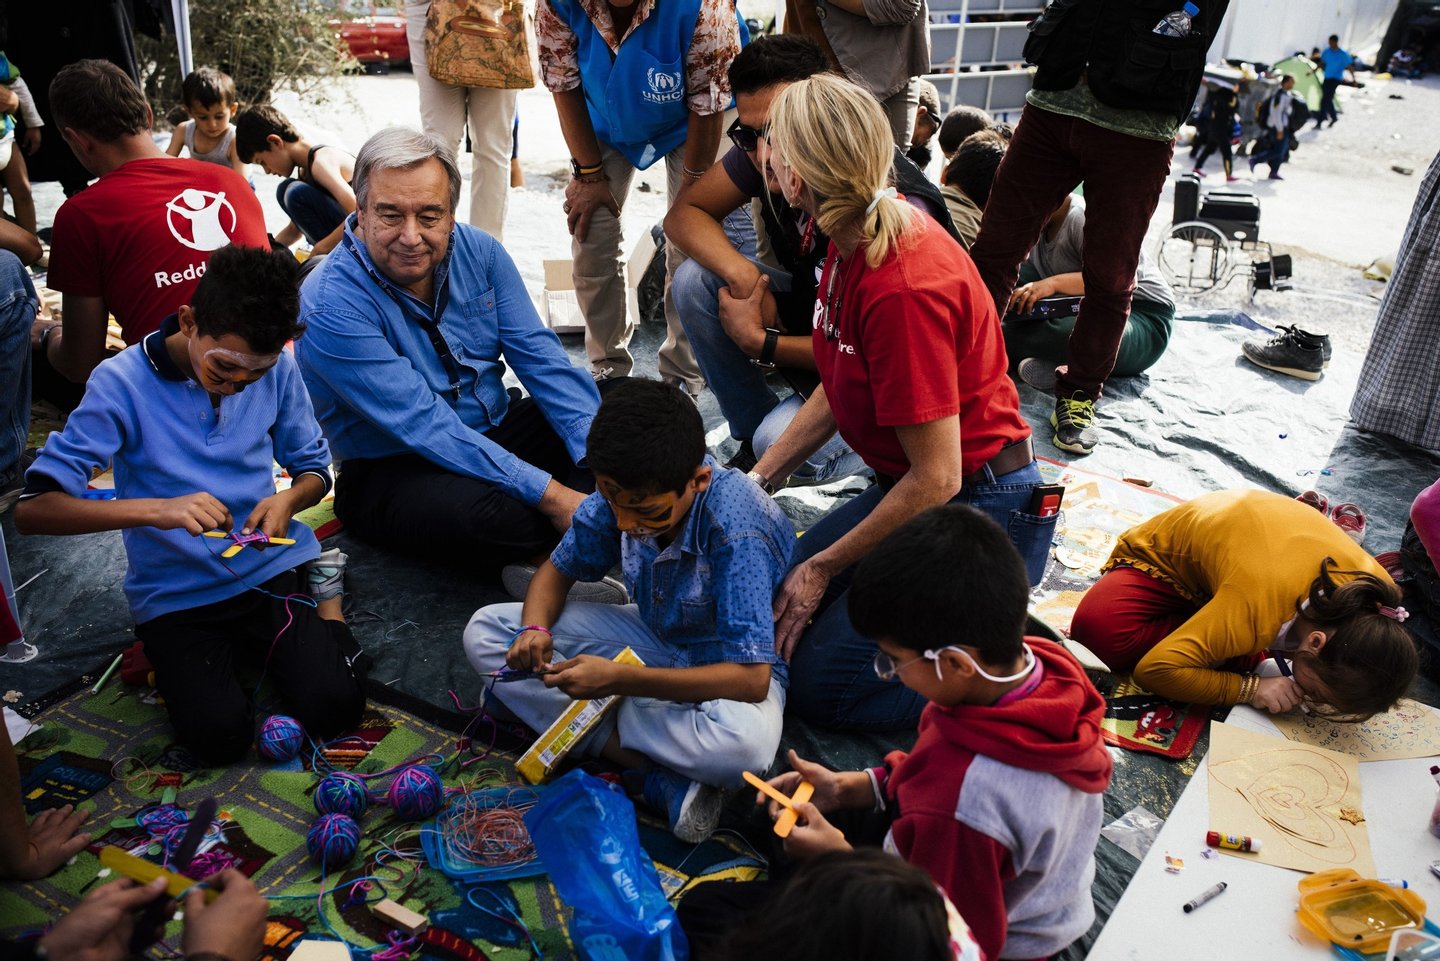 UNHCR commissioner Antonio Guterres (C) meets with migrant children during his visit to the Moria Identification Center on the Greek island of Lesbos on October 10, 2015. Greece was hit by a huge new surge in migrants as the United Nations on October 9 approved a European seize-and-destroy military operation against people smugglers in the Mediterranean. AFP PHOTO / DIMITAR DILKOFF (Photo credit should read DIMITAR DILKOFF/AFP/Getty Images)